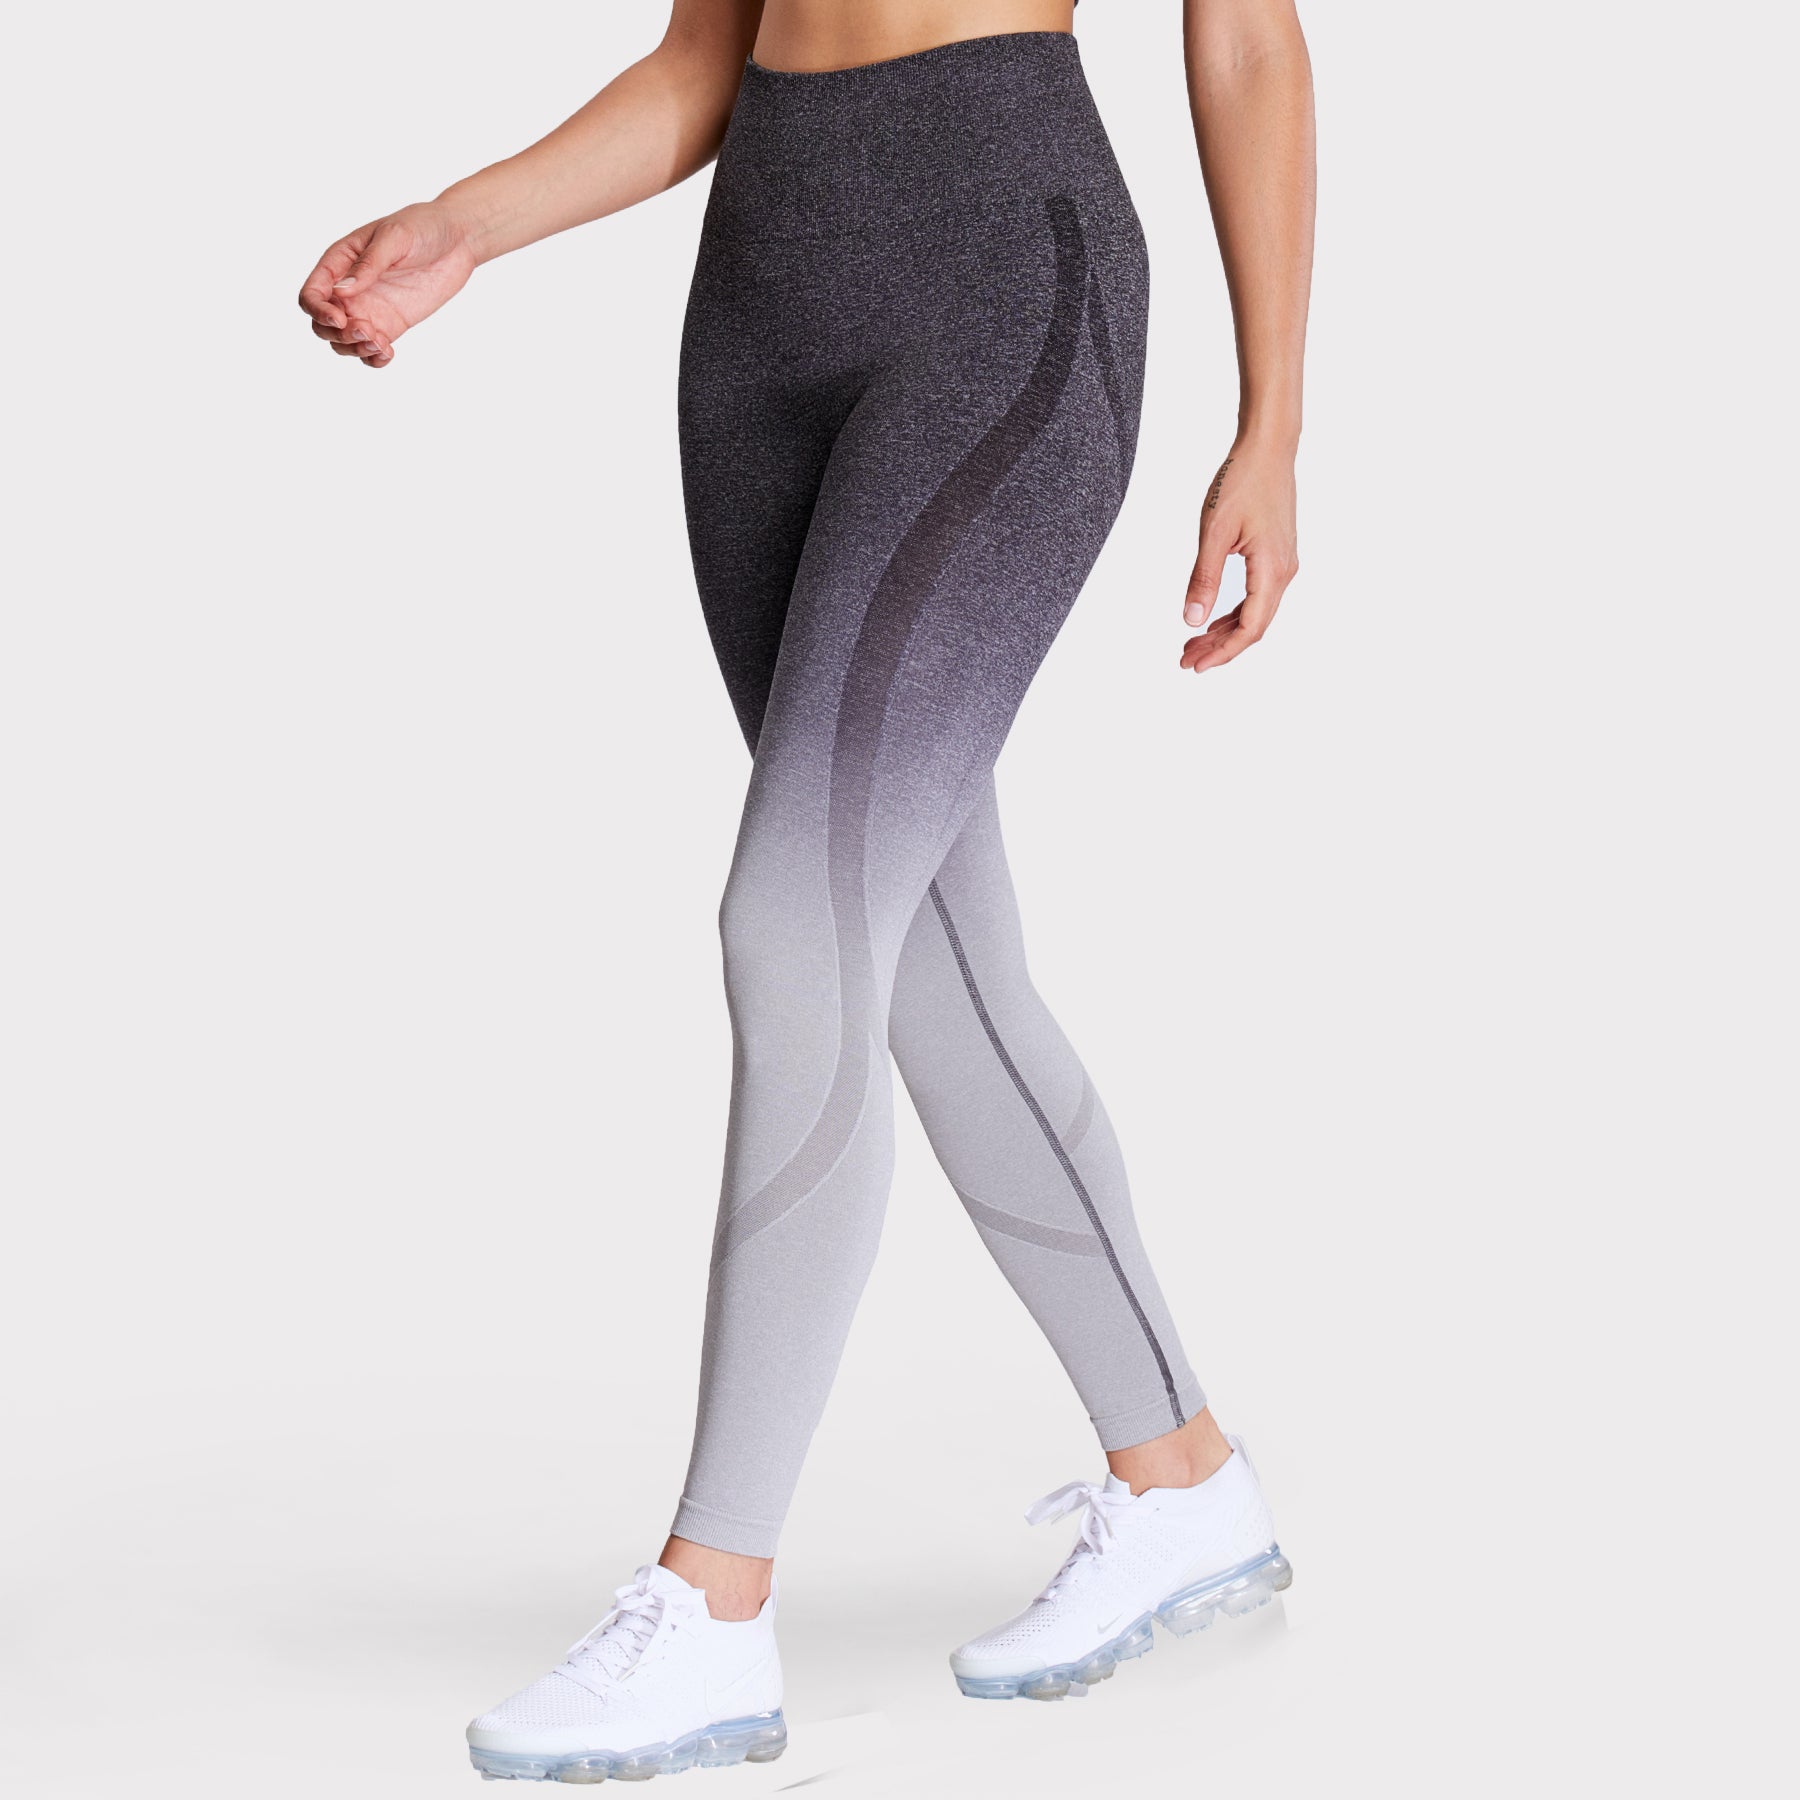 Aoxjox High Waisted Workout Leggings for Women Tummy Control